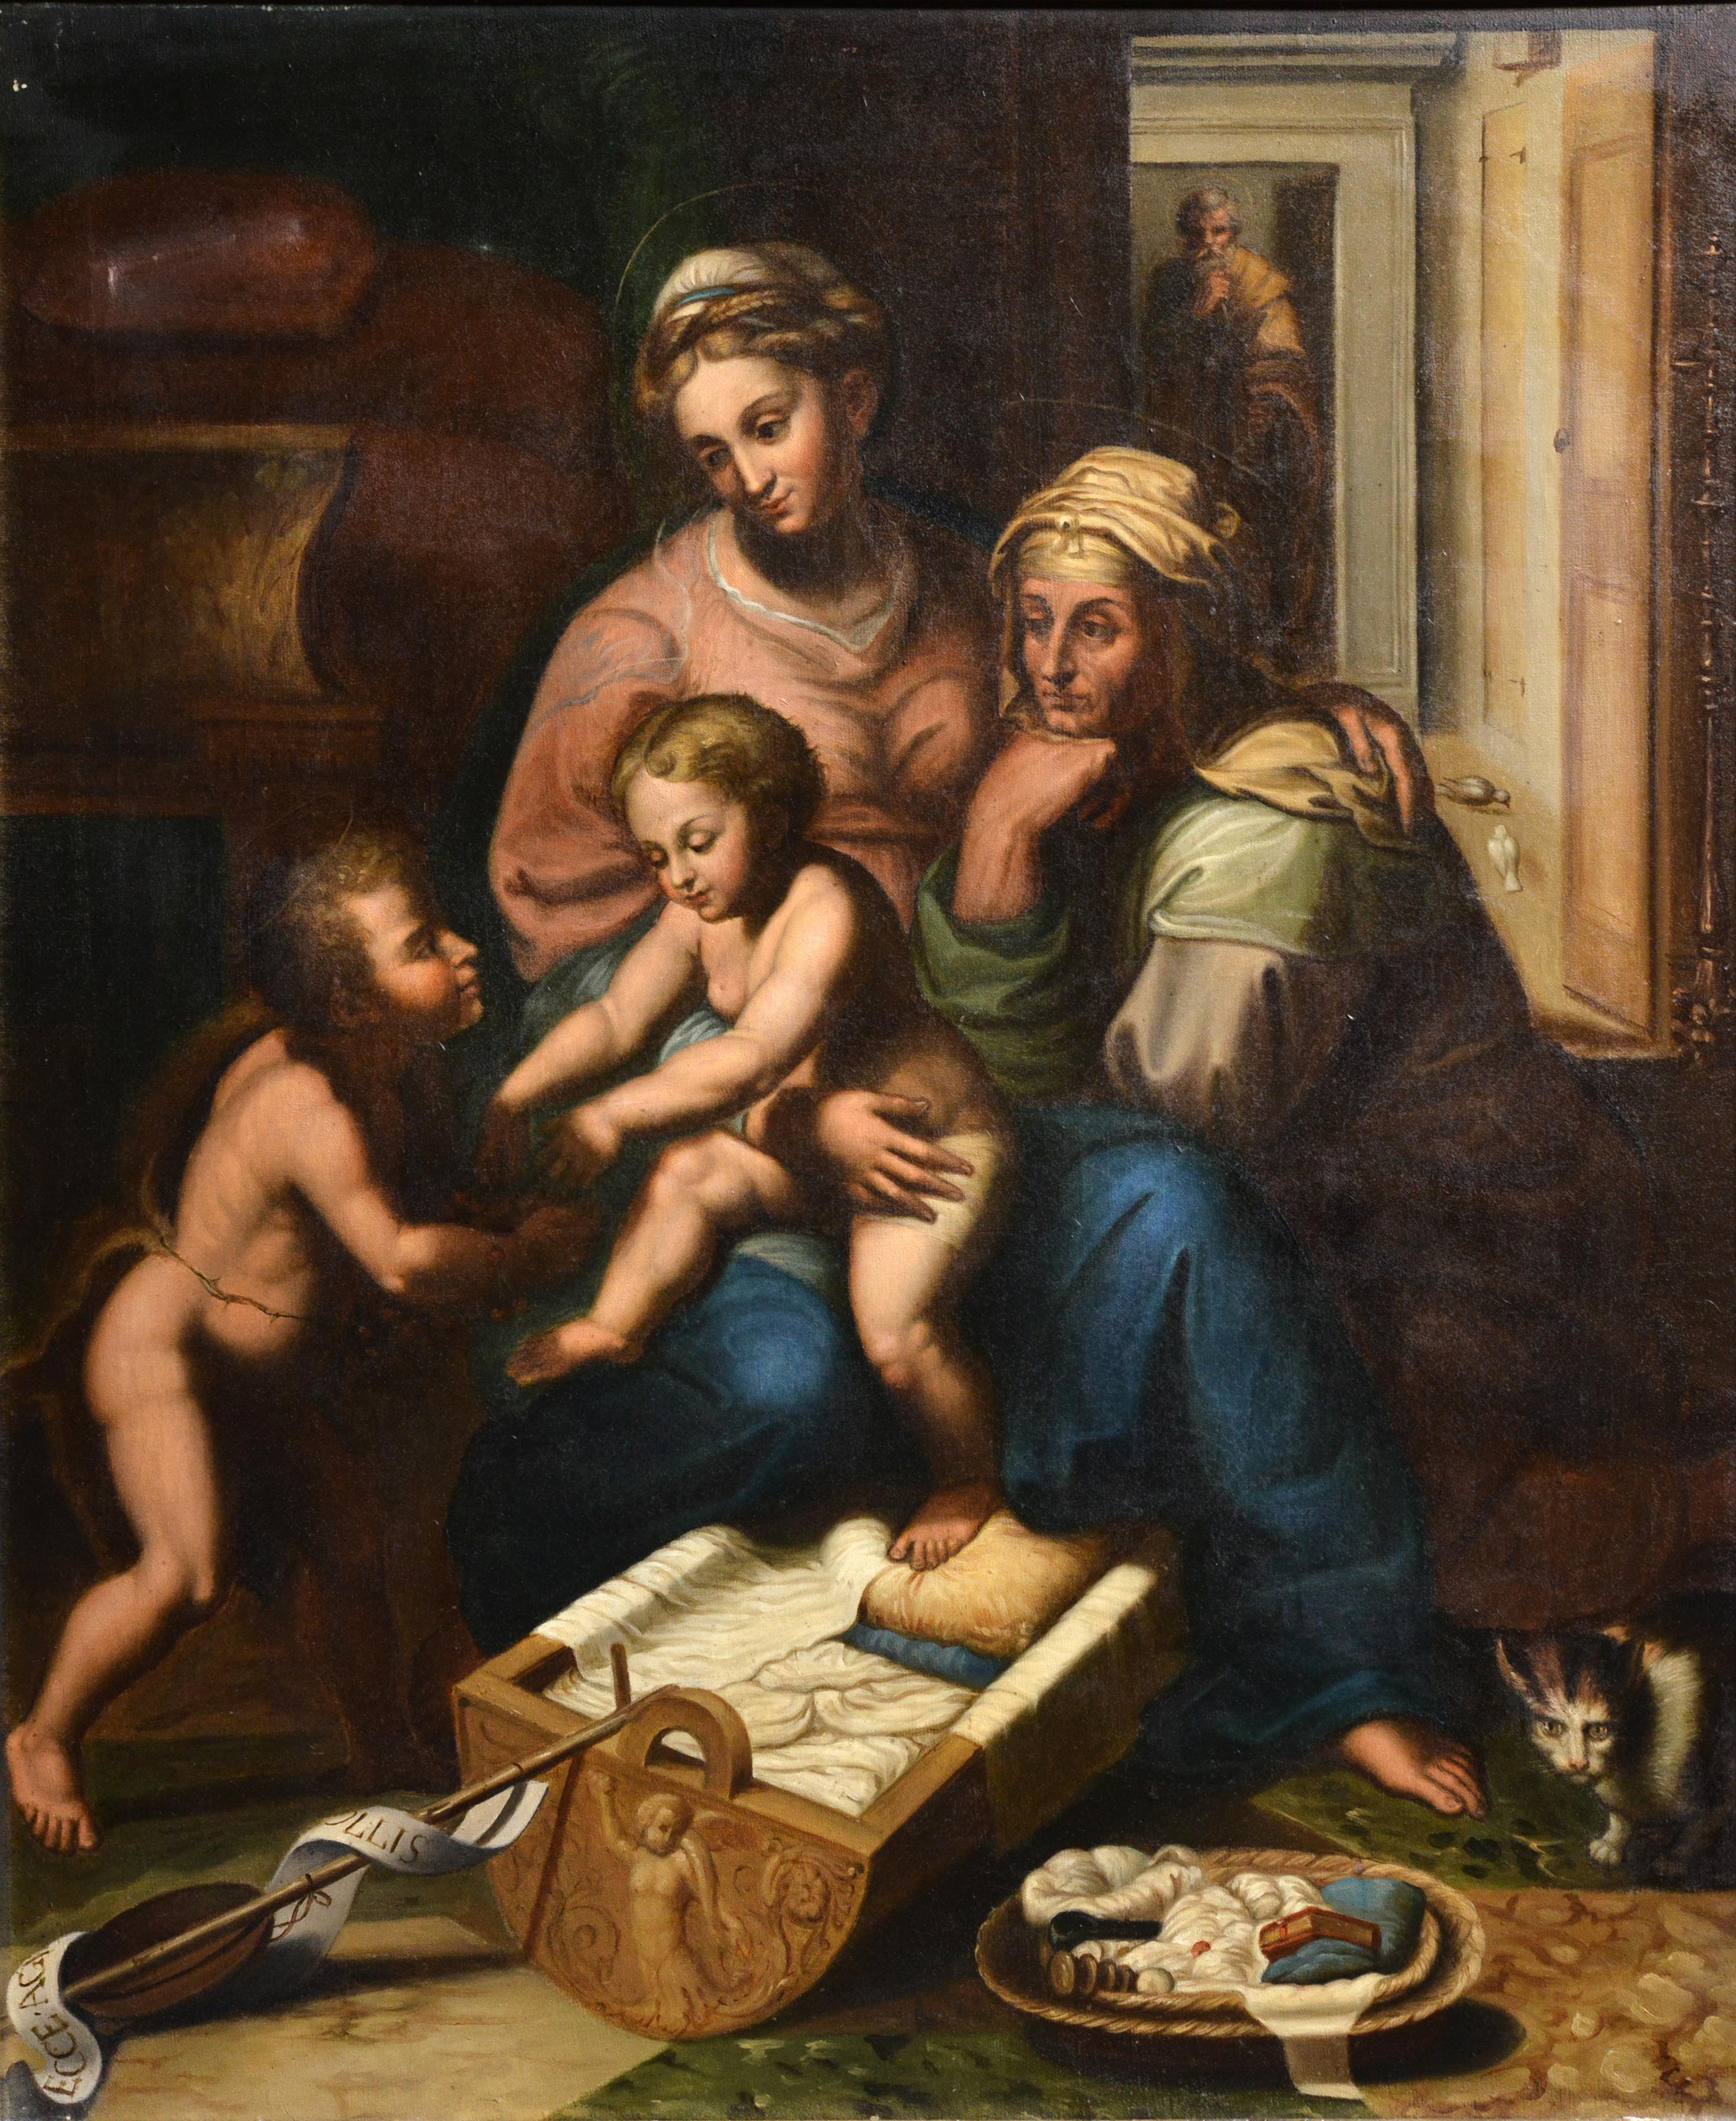 This tender depiction of the Holy Family represents a subject which was central to Raphael's oeuvre. The painting is based on the famous panel by Giulio Romano, called Madonna della Gatta, now in the Museo Nazionale di Capodimonte in Naples. The